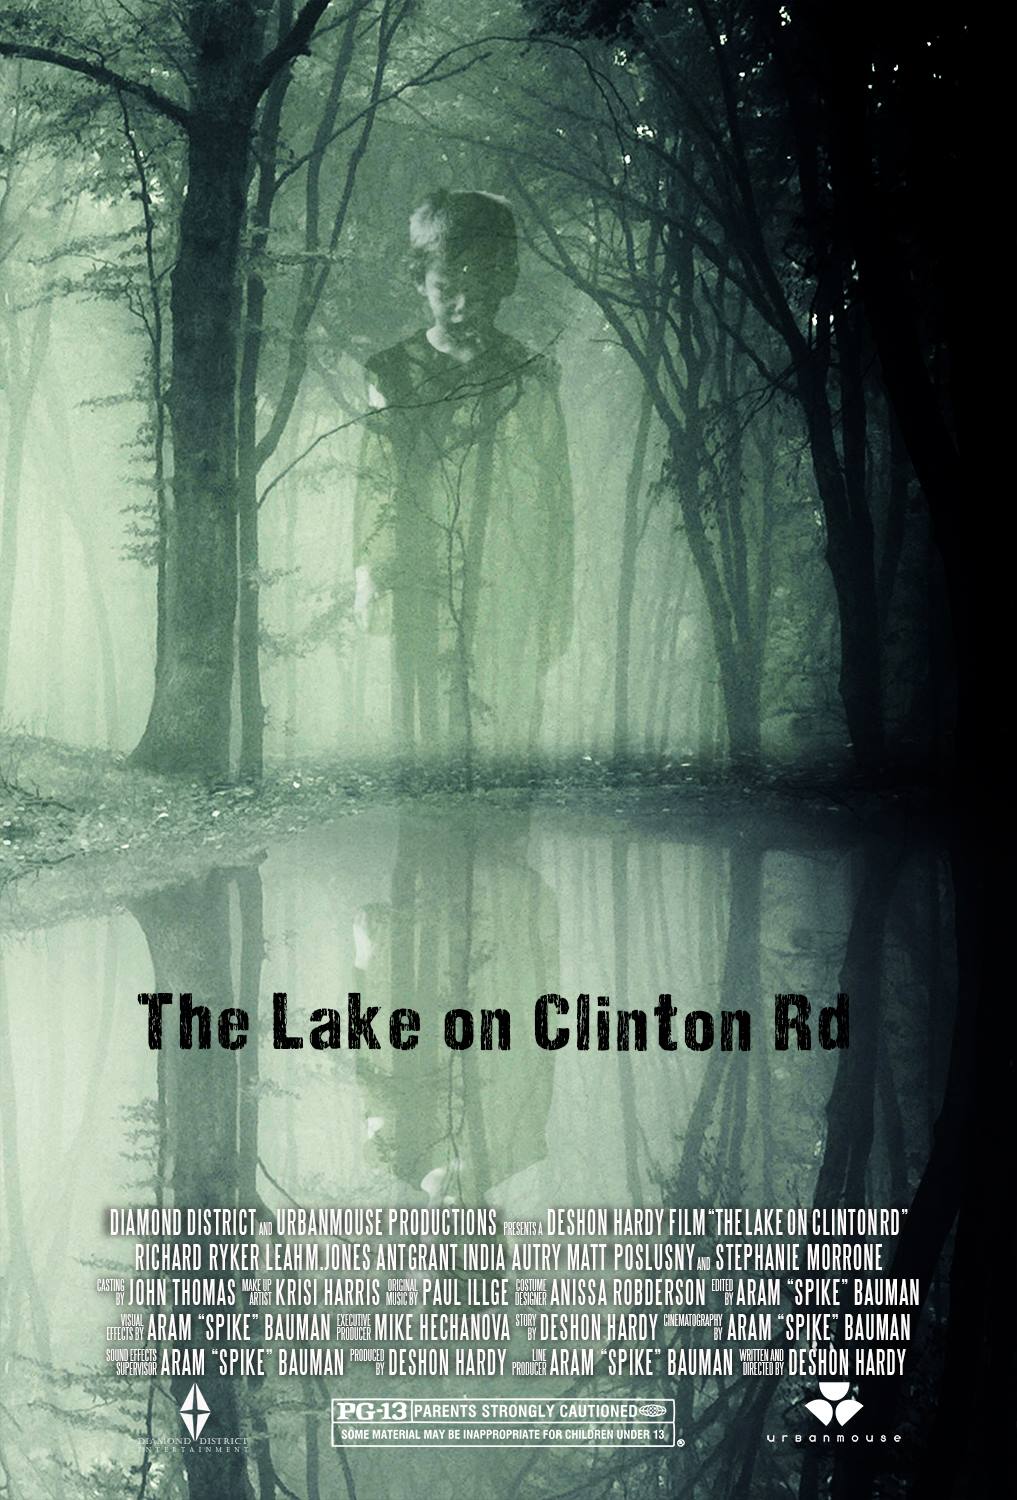 The Lake on Clinton rd.